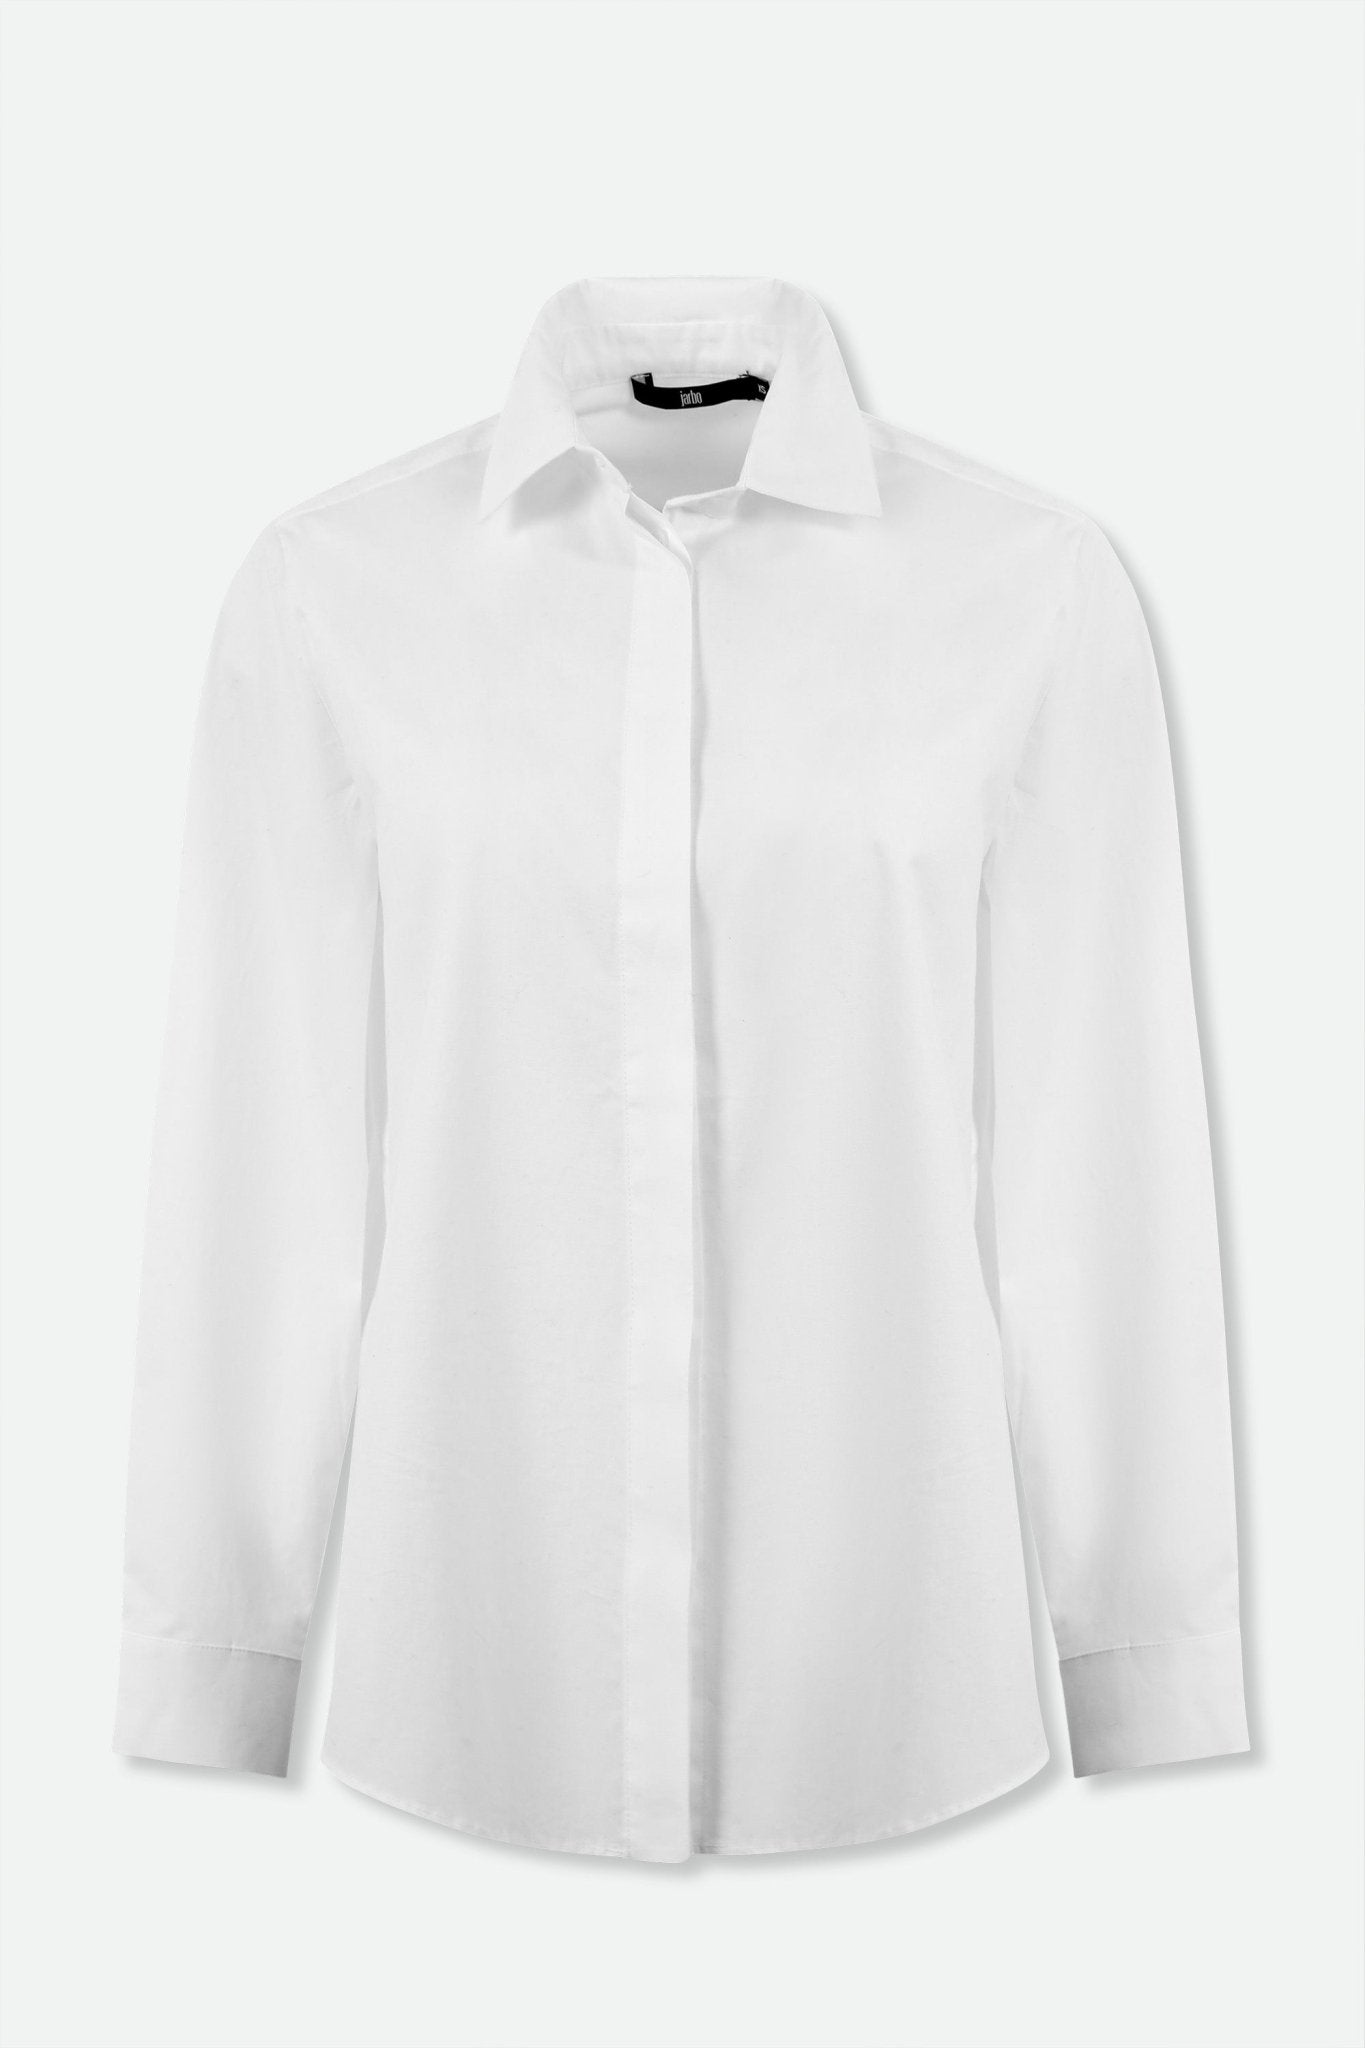 THE CLASSIC SHIRT IN ITALIAN COTTON STRETCH - Jarbo